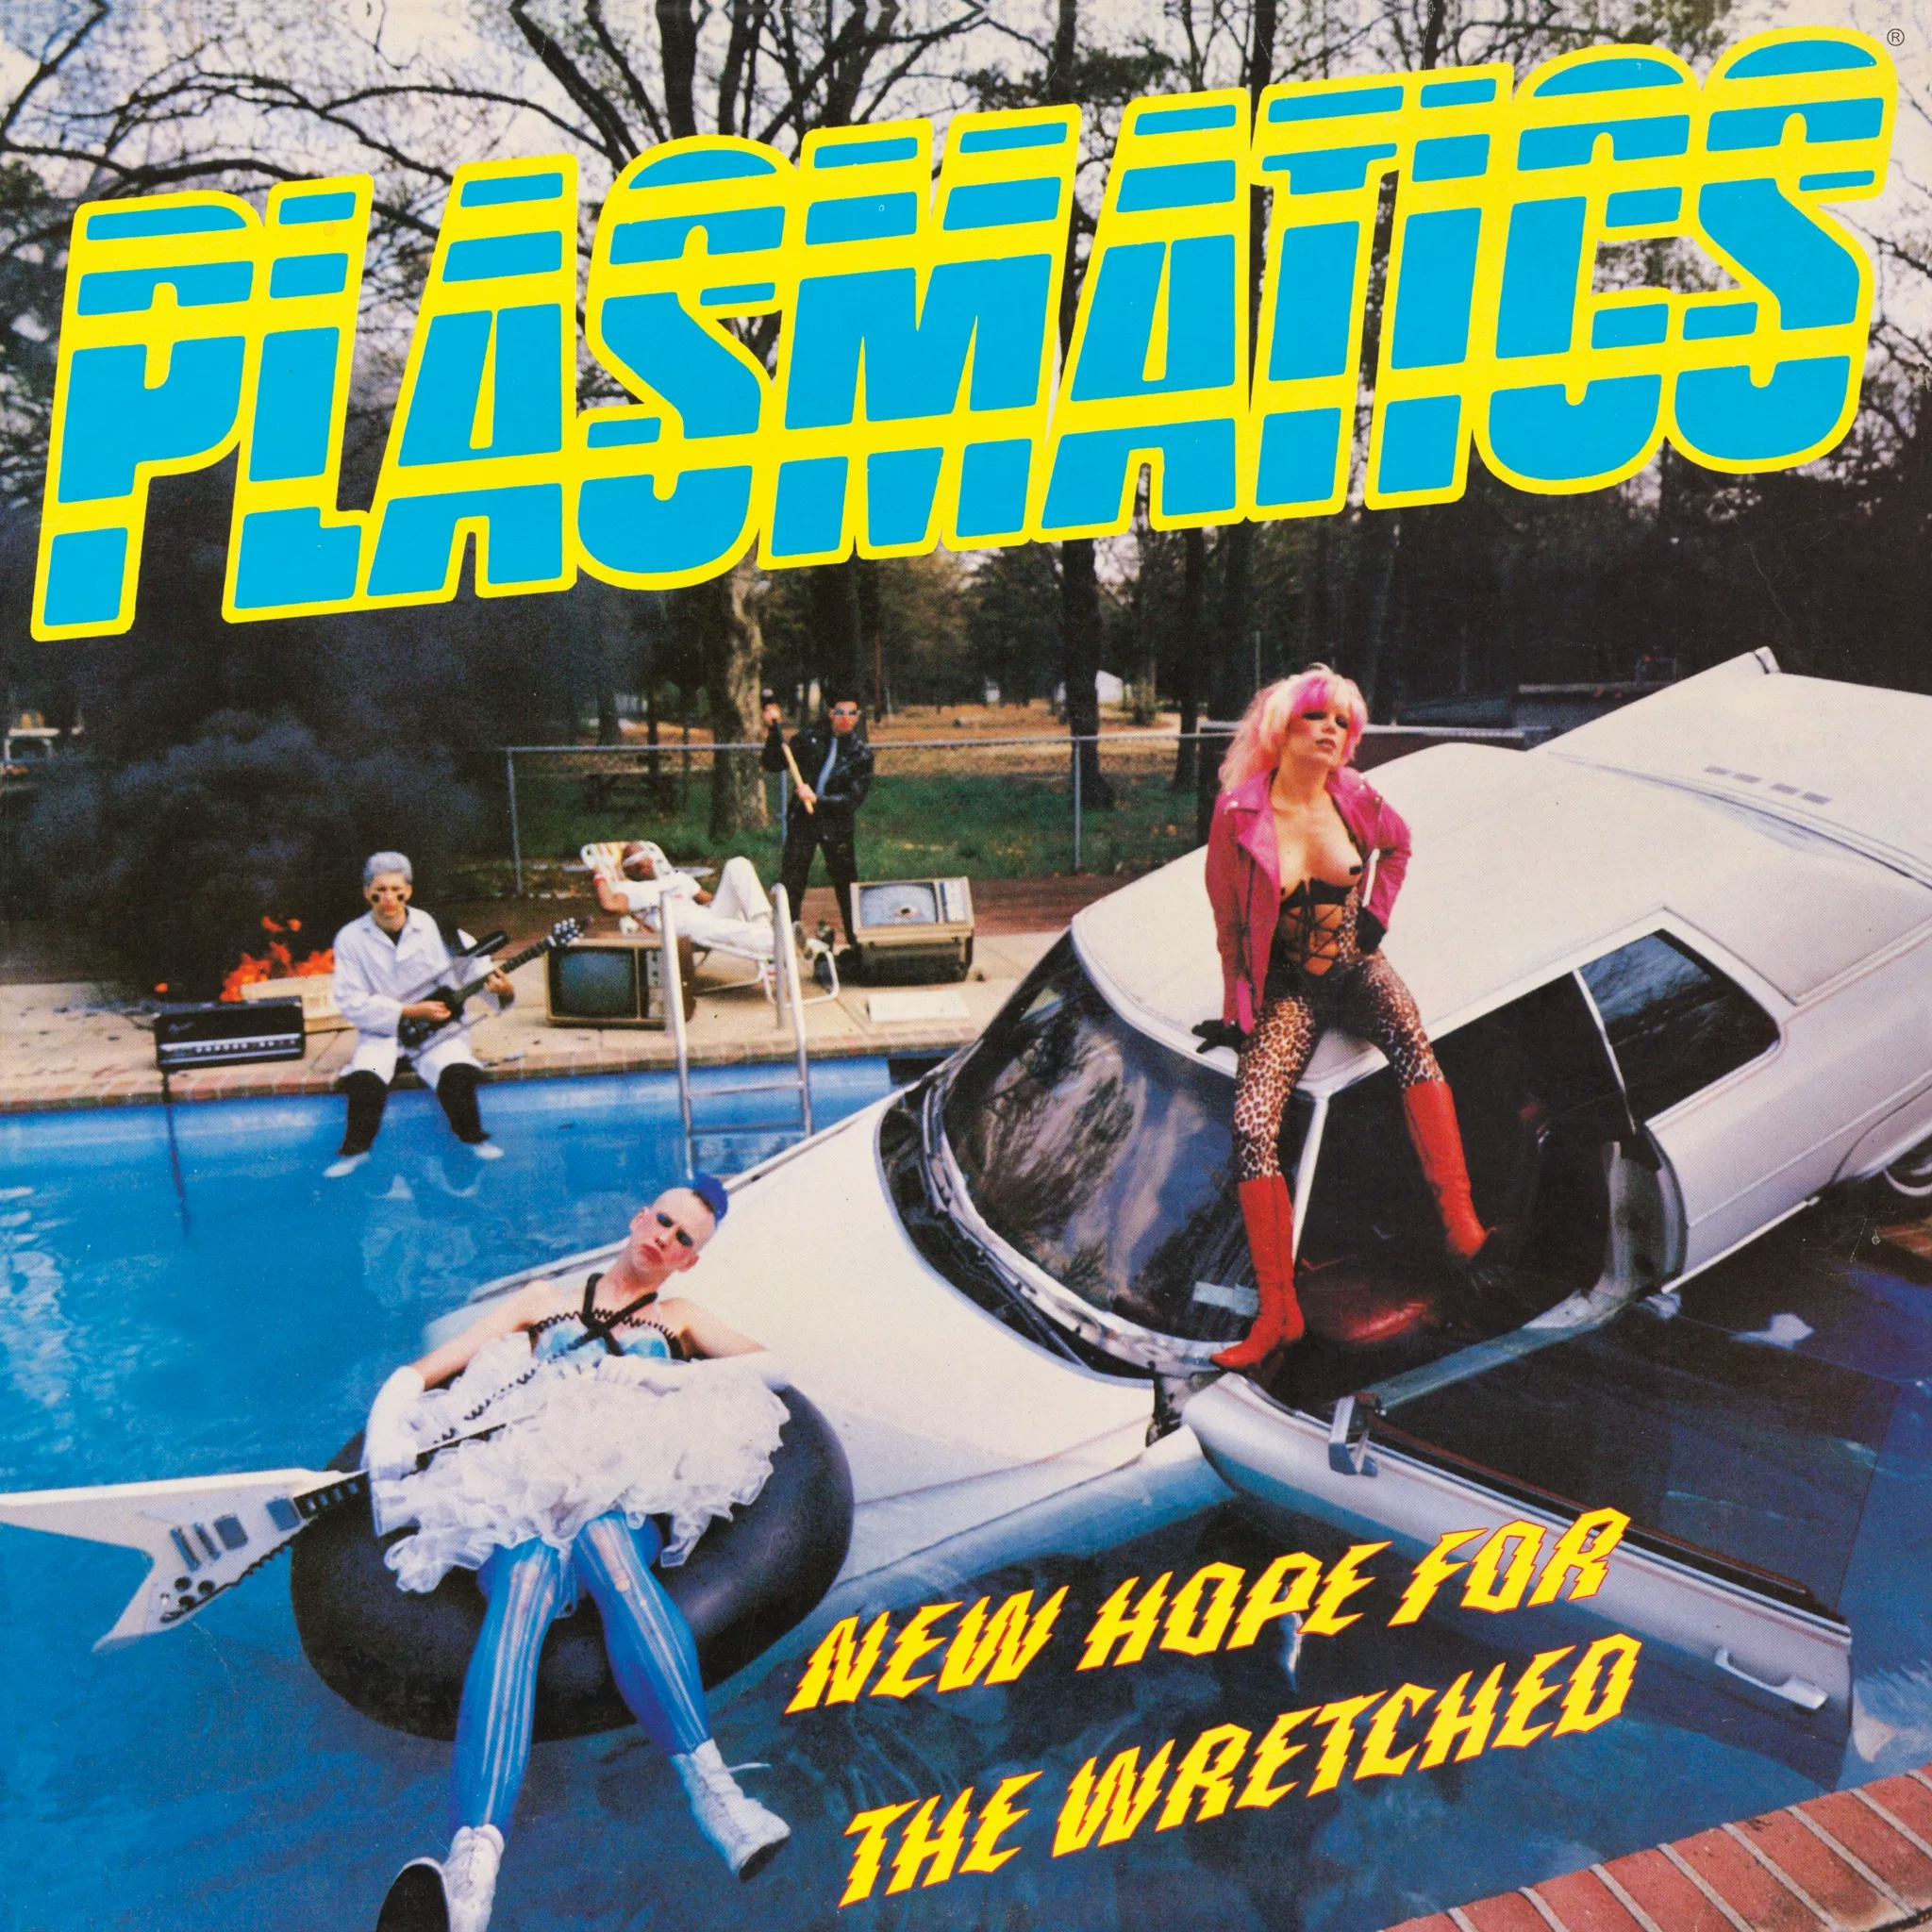 Album artwork for Album artwork for New Hope For The Wretched by Plasmatics by New Hope For The Wretched - Plasmatics